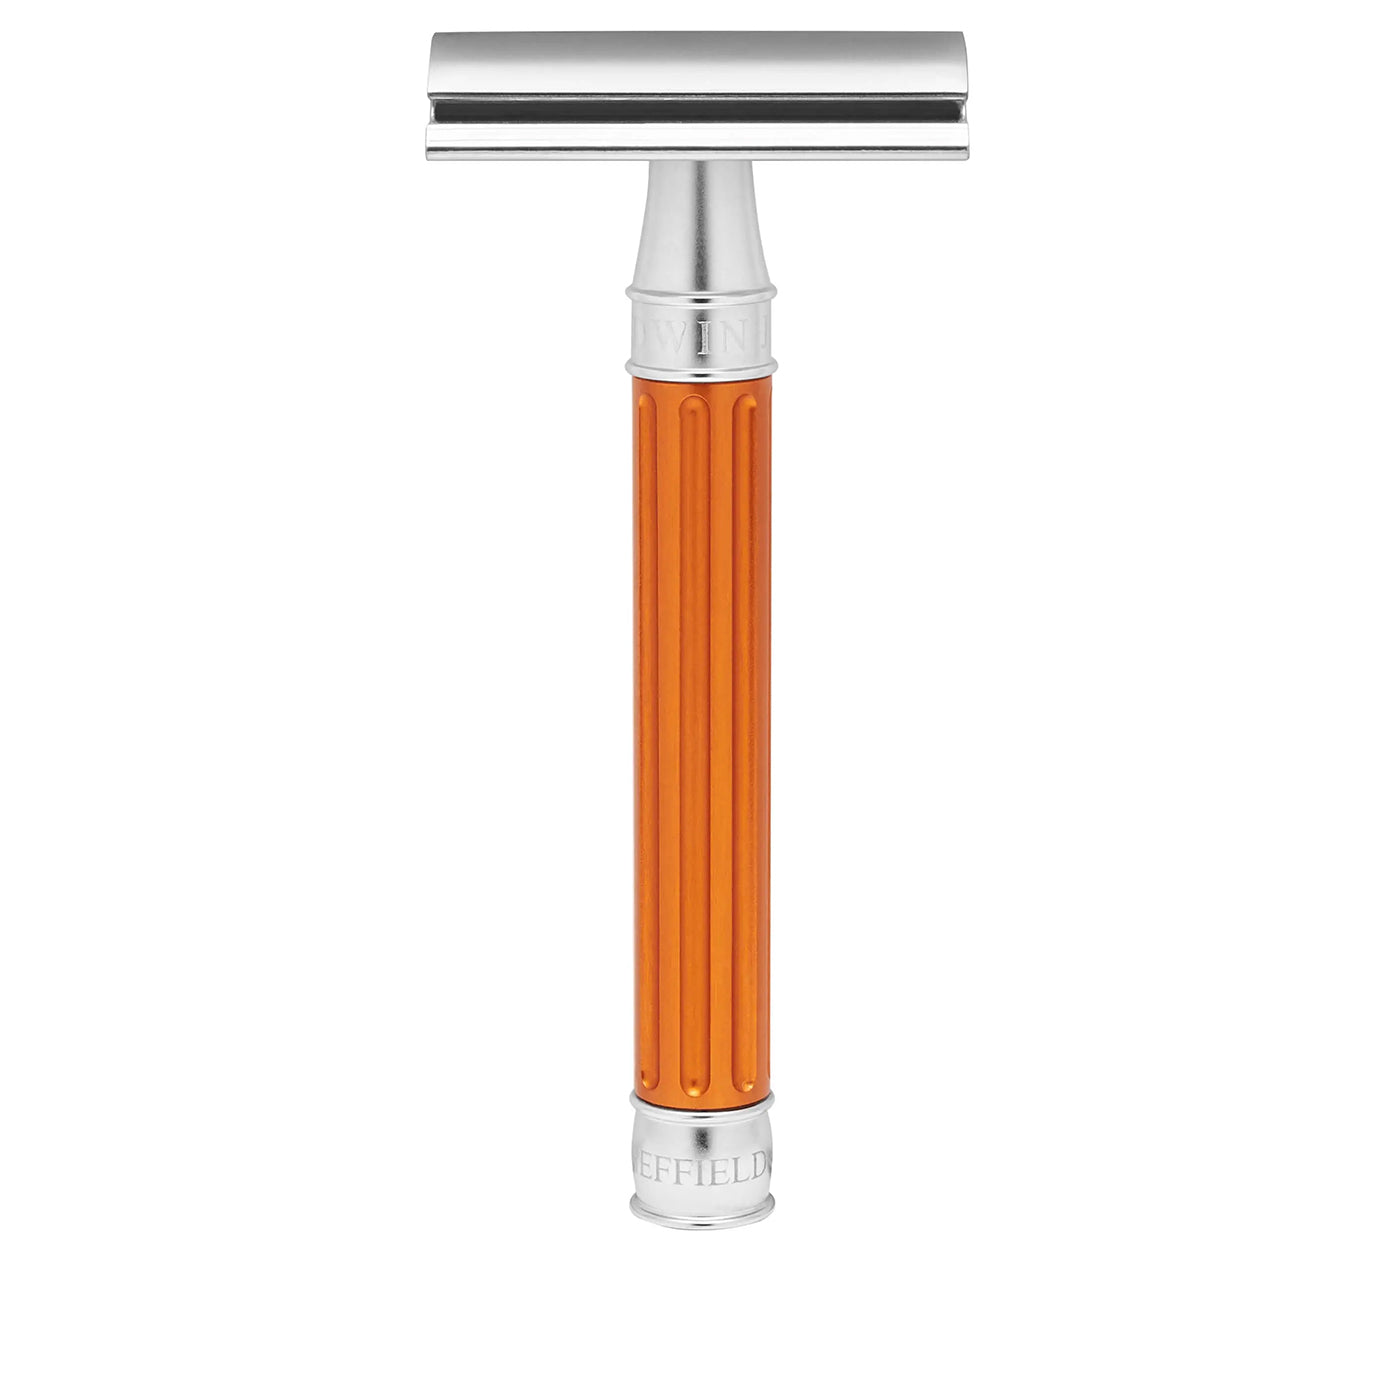 edwin jagger 3one6 stainless steel grooved double edge safety razor orange